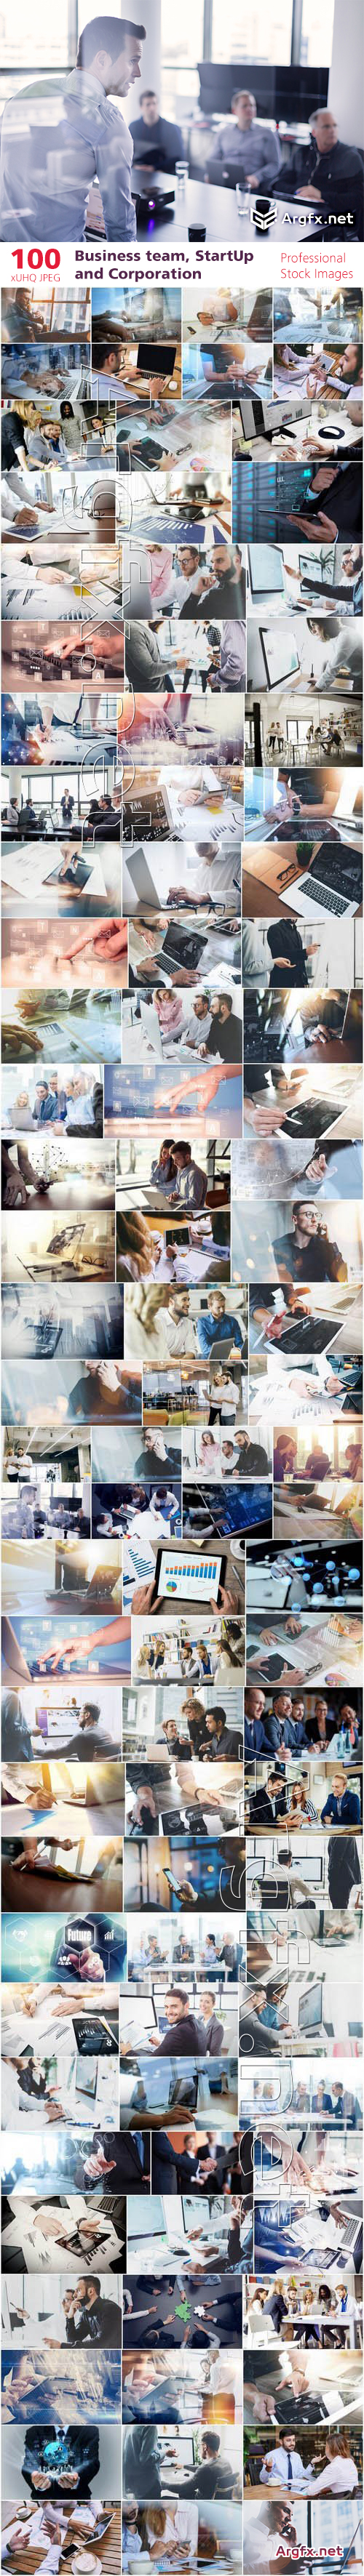  Business team, StartUp and Corporation - 100xUHQ JPEG Professional Stock Images